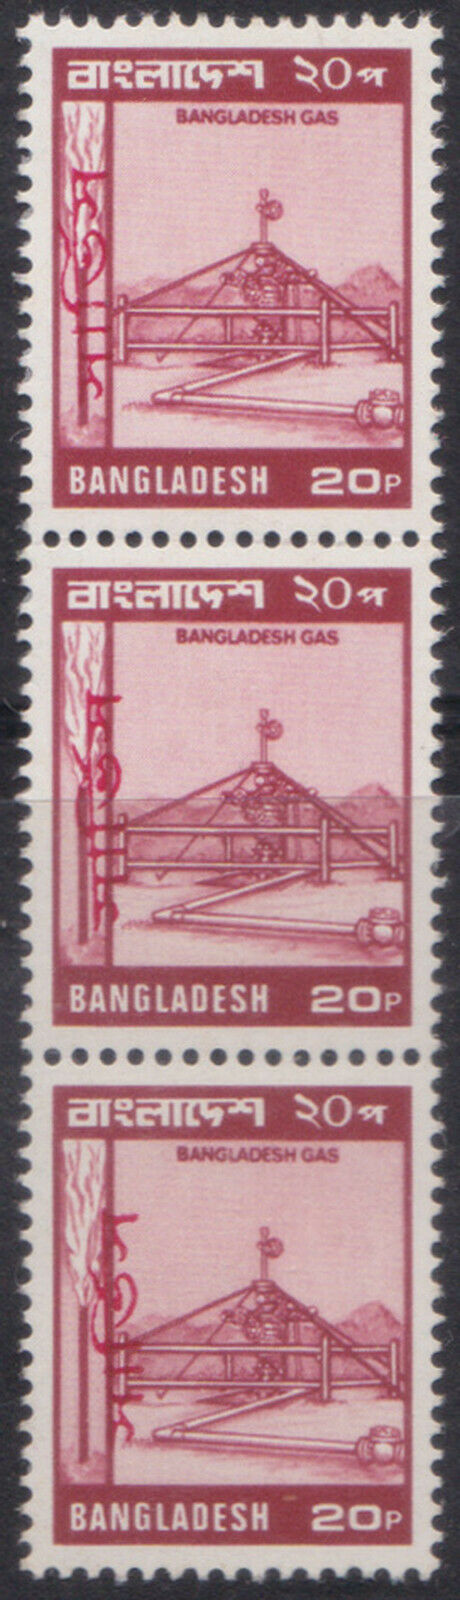 Bangladesh 20p Gas Unissued Red Overprint Shifted Position Change Strip Of 3 Mnh